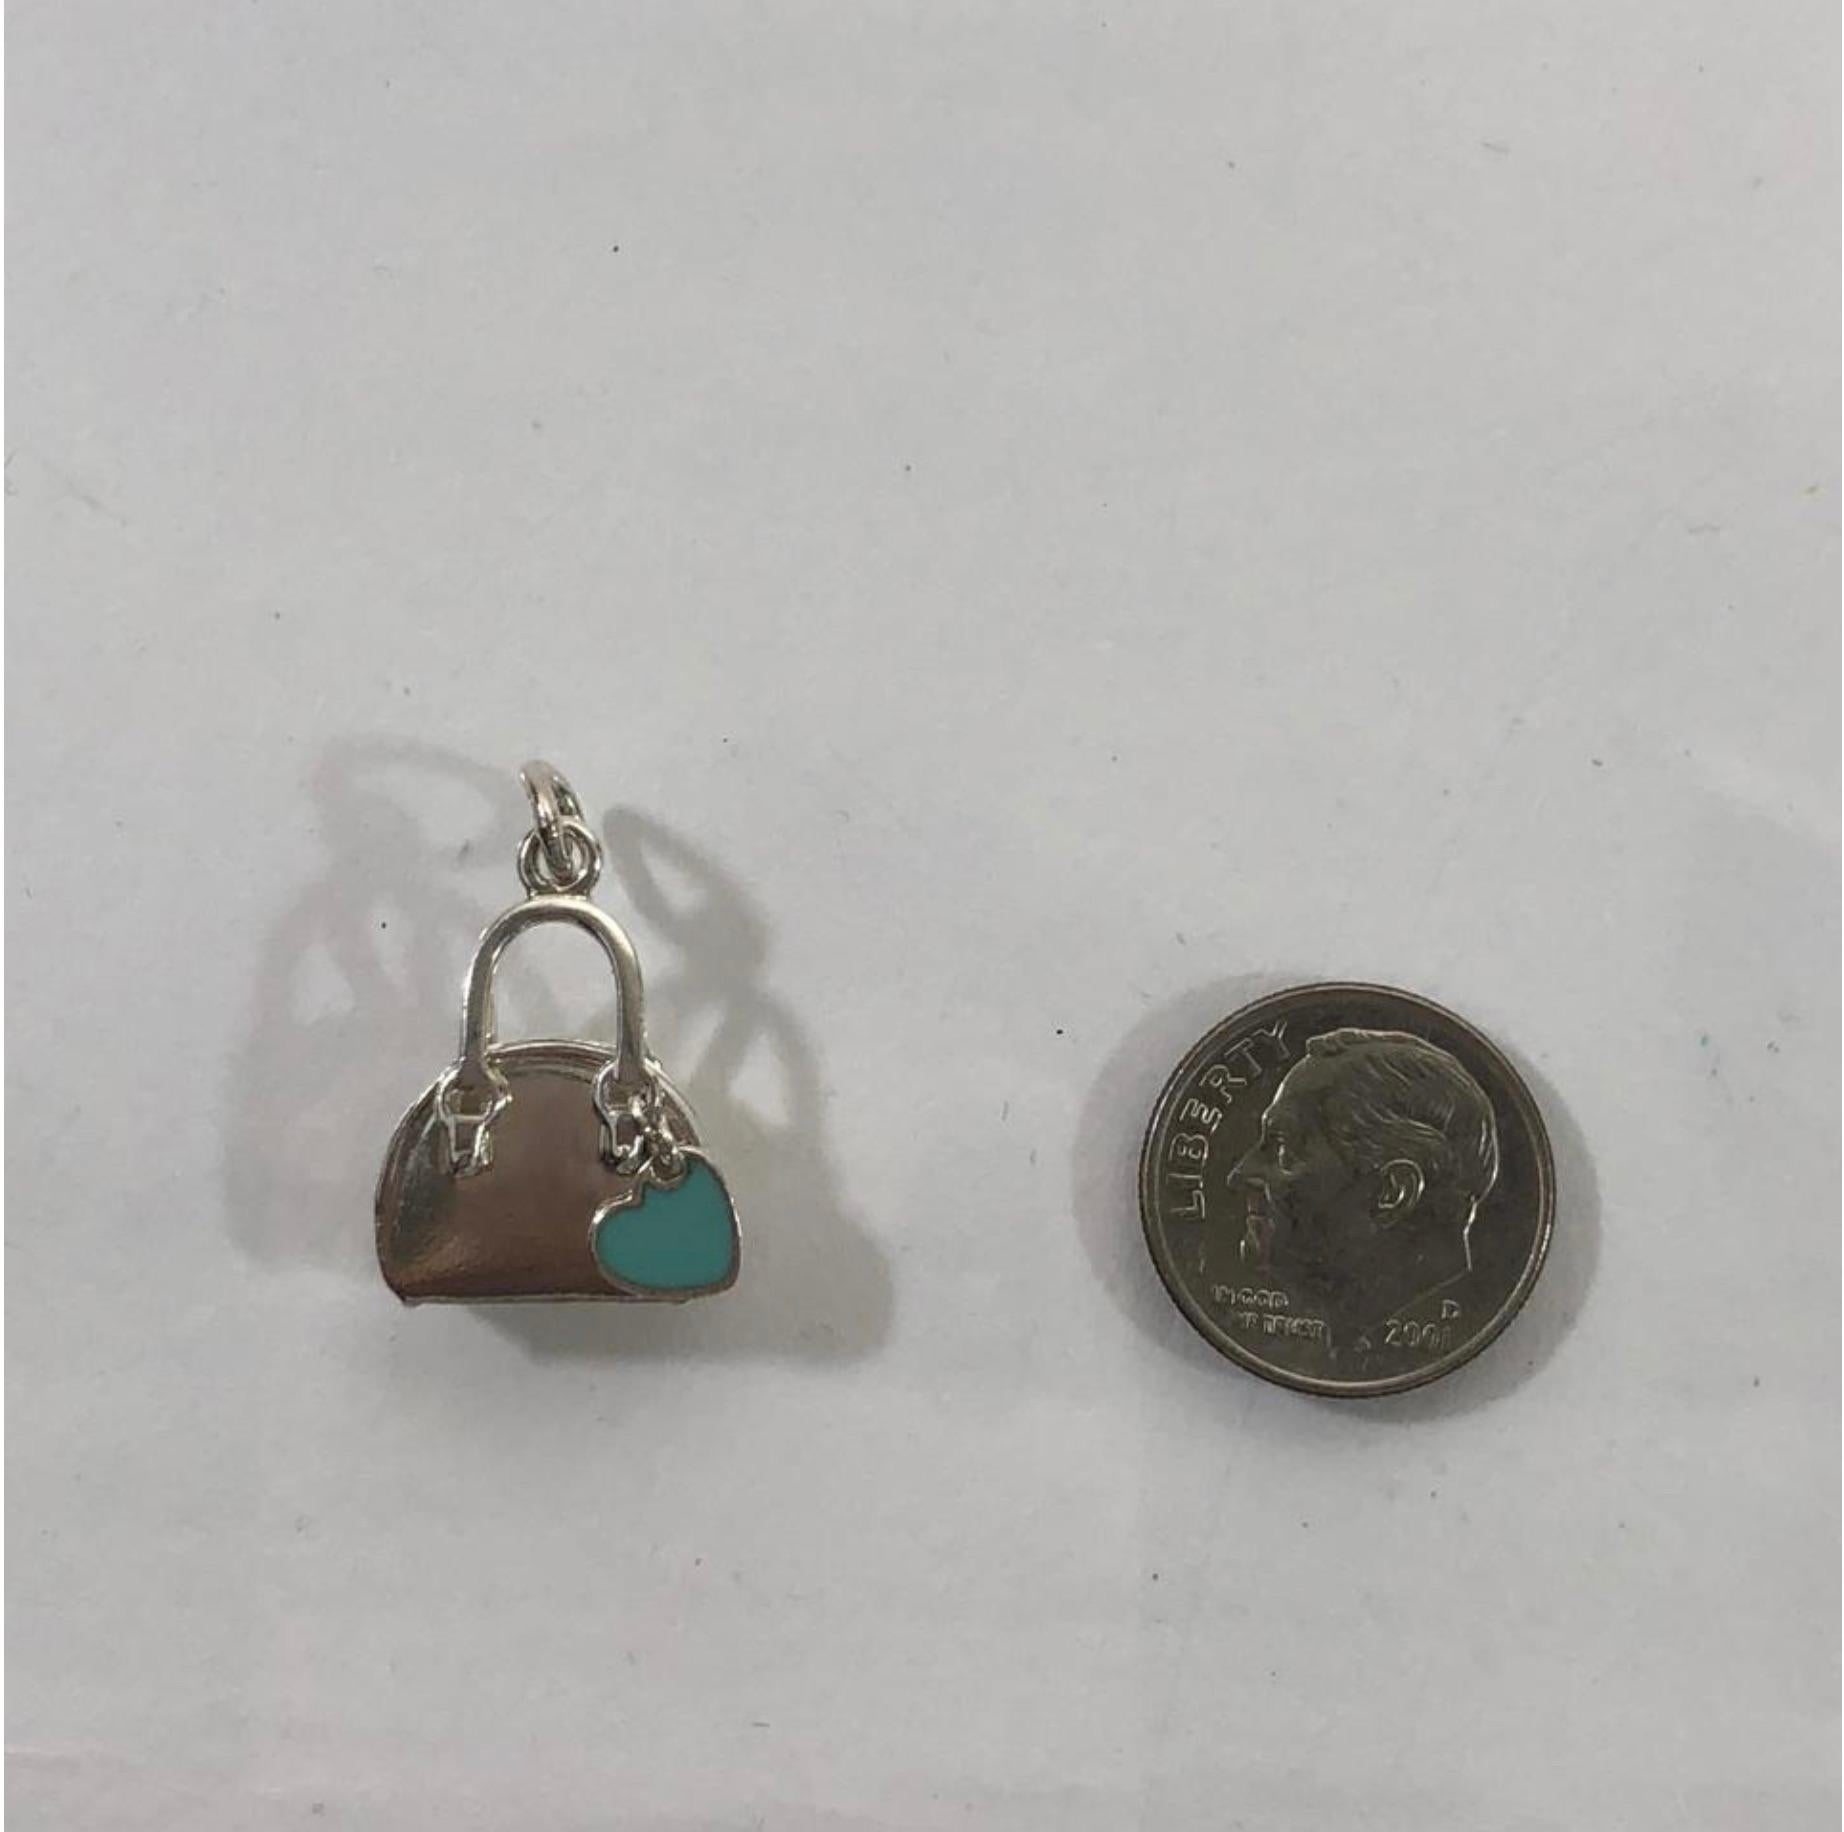 Tiffany & Co. Sterling Silver Handbag Charm or Pendent with Hanging Heart 1